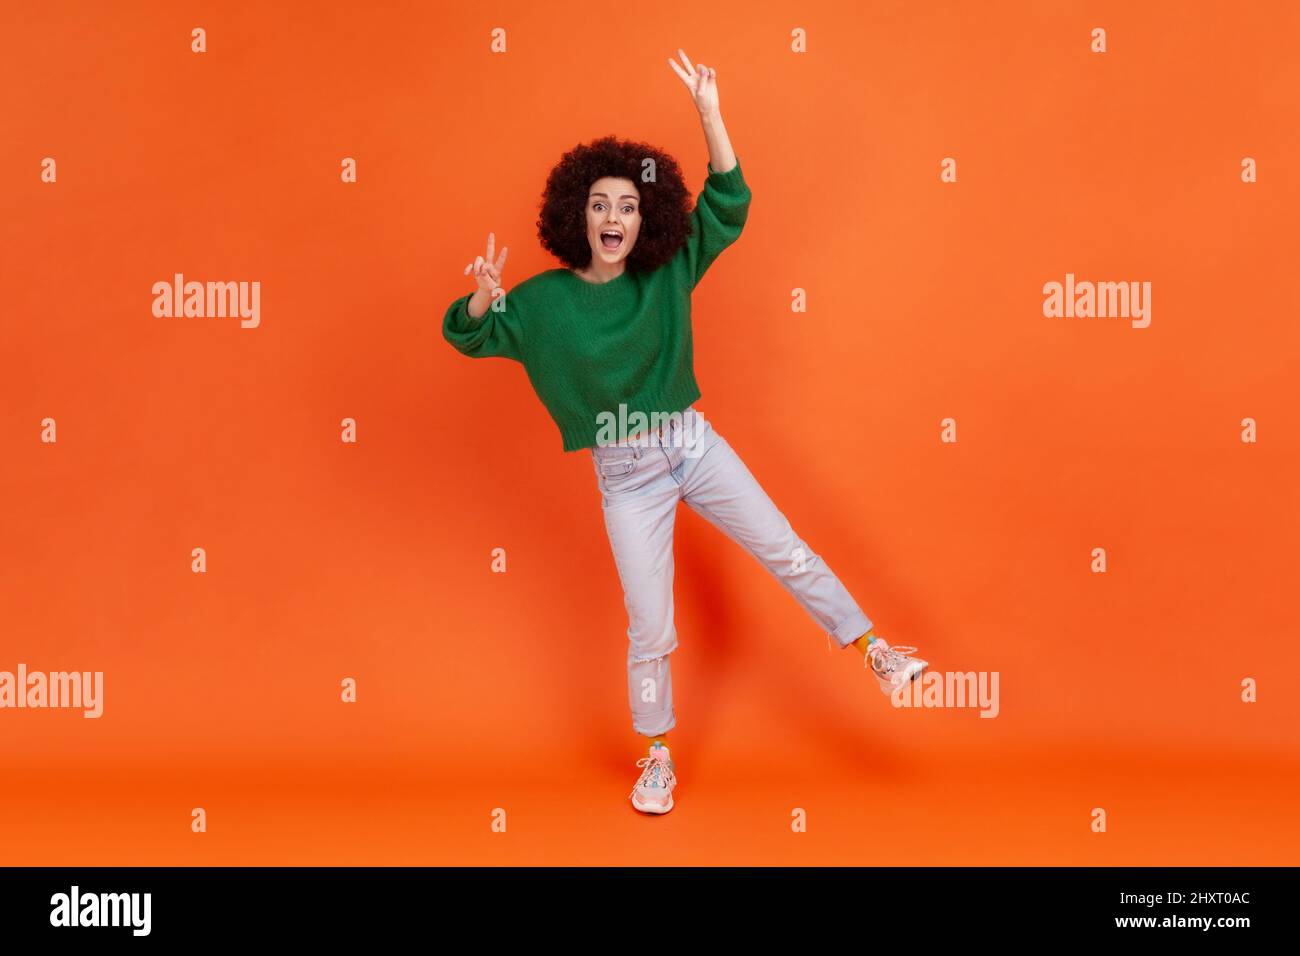 Full length portrait of amazed happy woman with Afro hairstyle wearing green casual style sweater standing on one leg, showing victory gesture, v sign. Indoor studio shot isolated on orange background Stock Photo